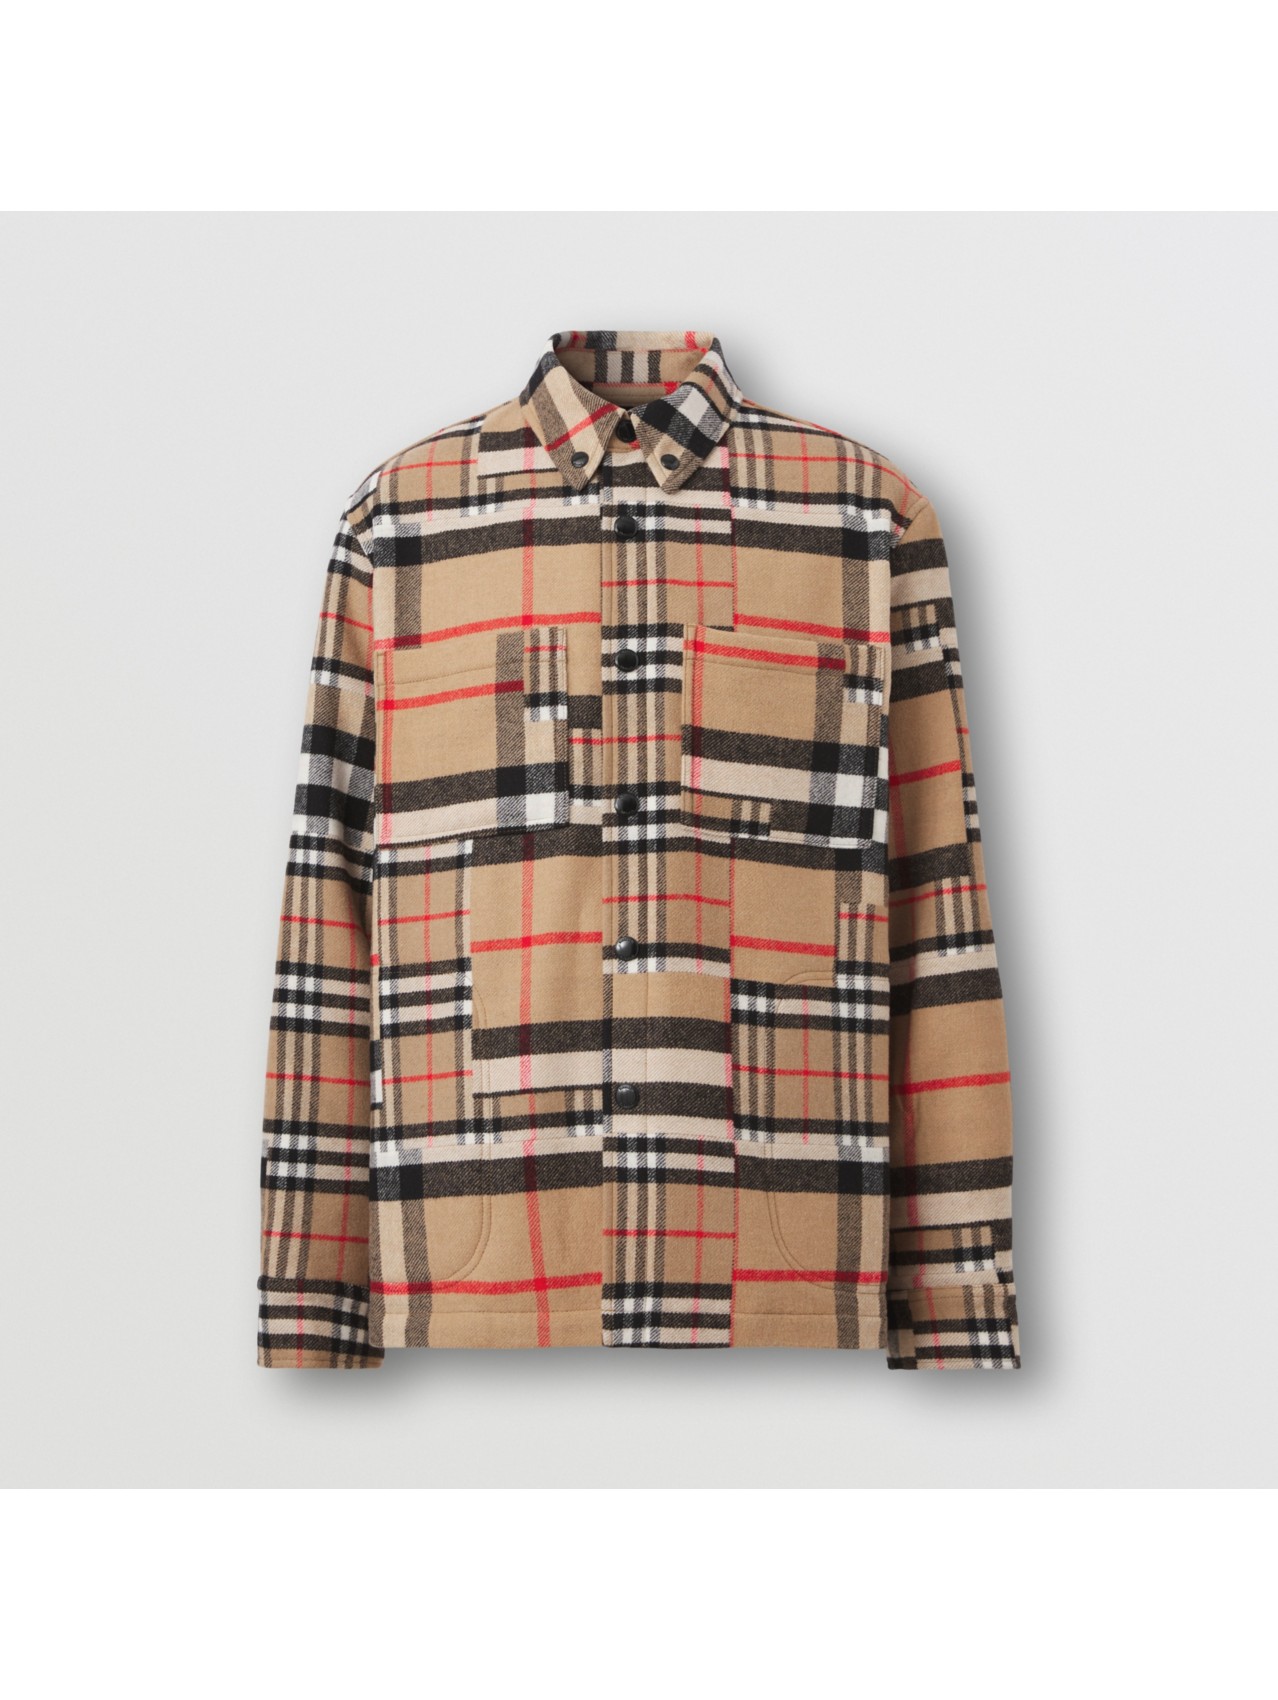 Designer Clothing | Luxury Menswear | Burberry® Official